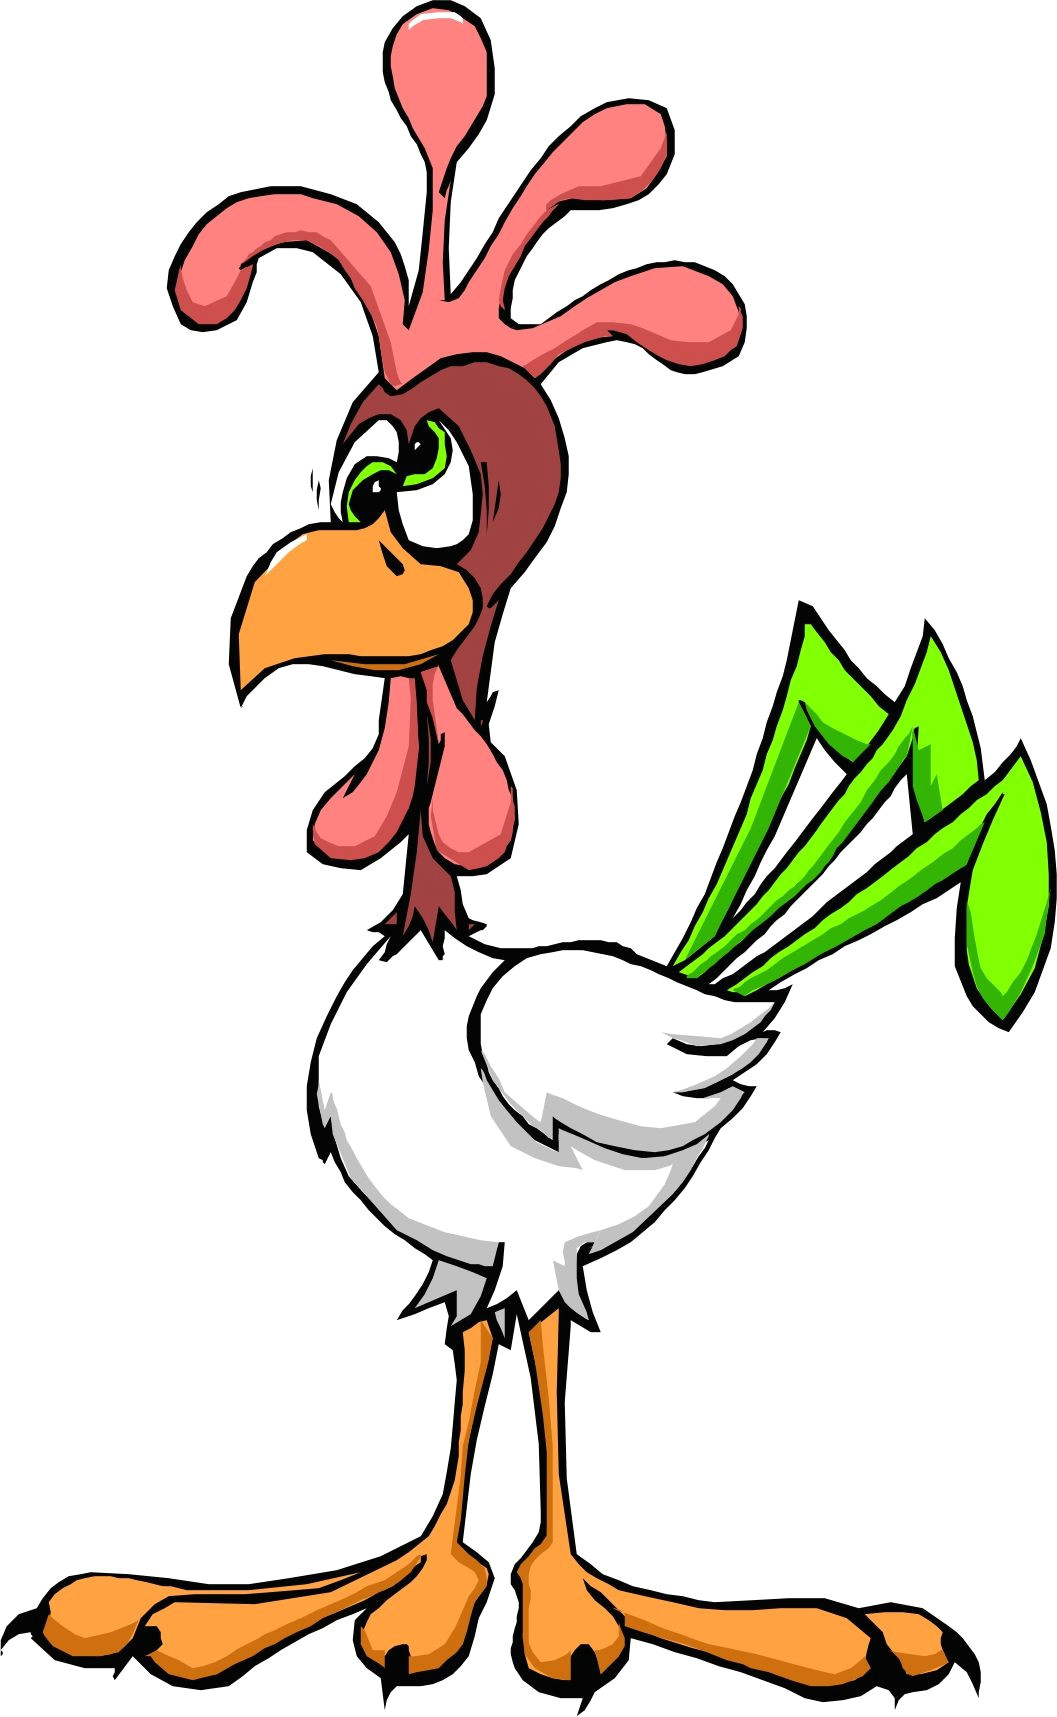 Drawing A Cartoon Chicken Cartoon Chickens Clipart Best Backgrounds Clipart Images Etc